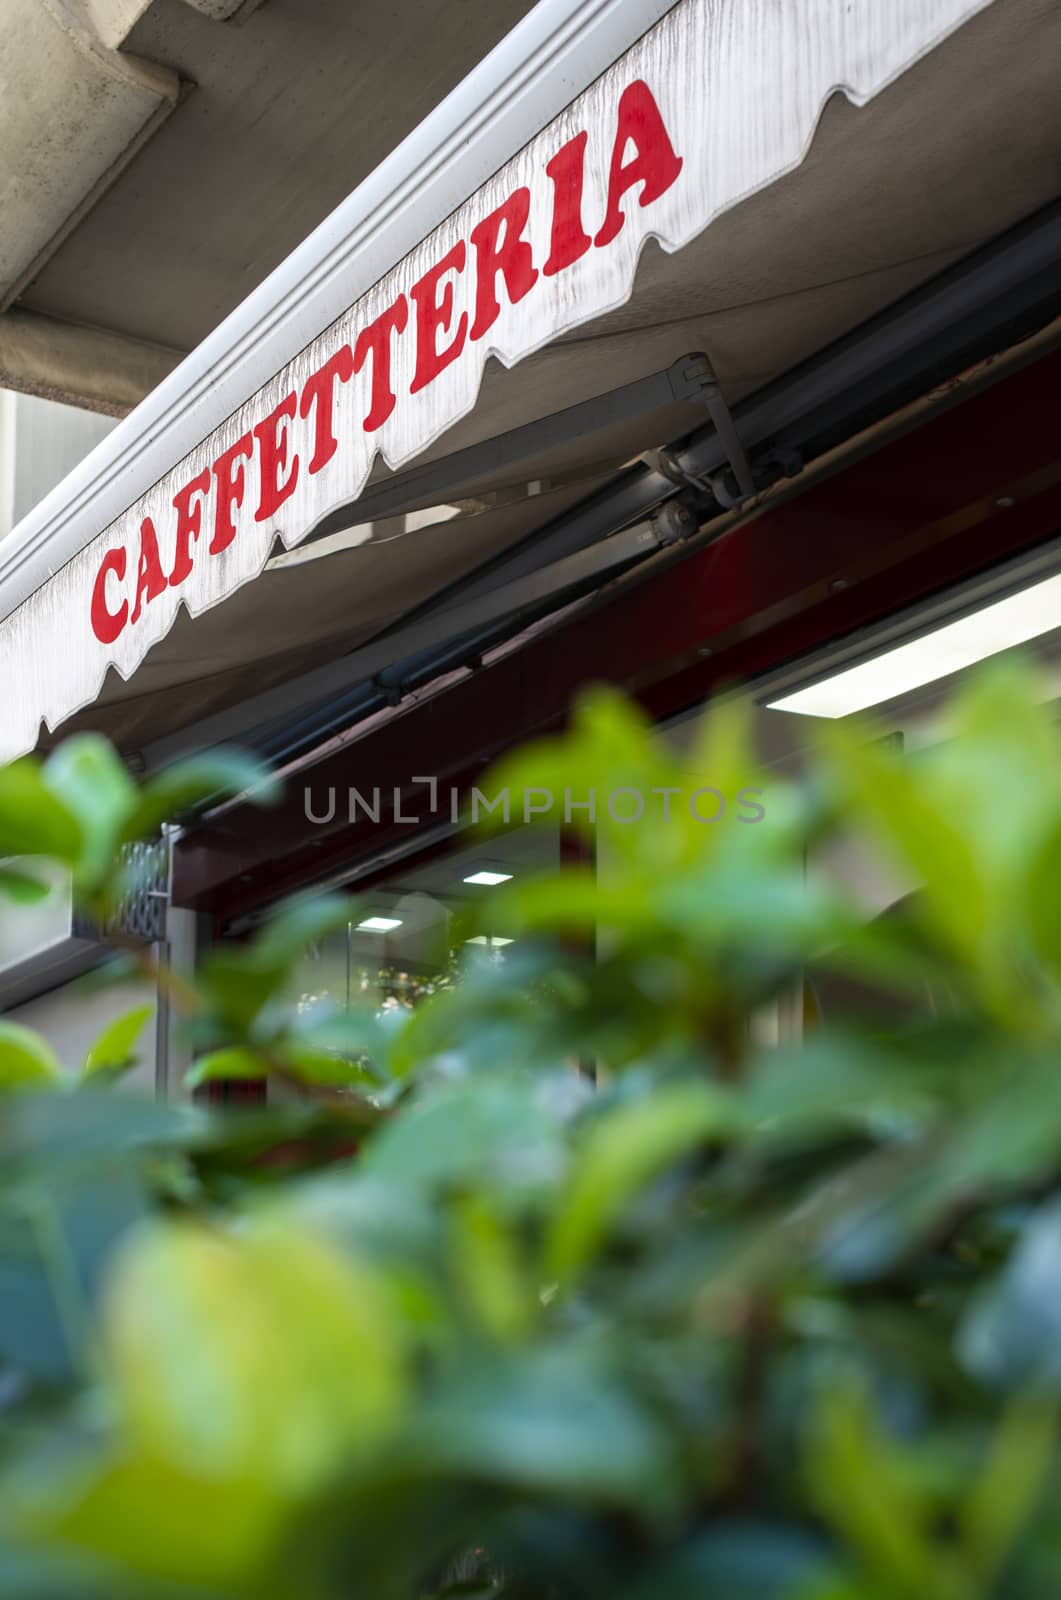 Text caffetteria on sunblind. Italian coffee shop. Facade on coffee shop. Green foliage in front of cafe and sweets shop.